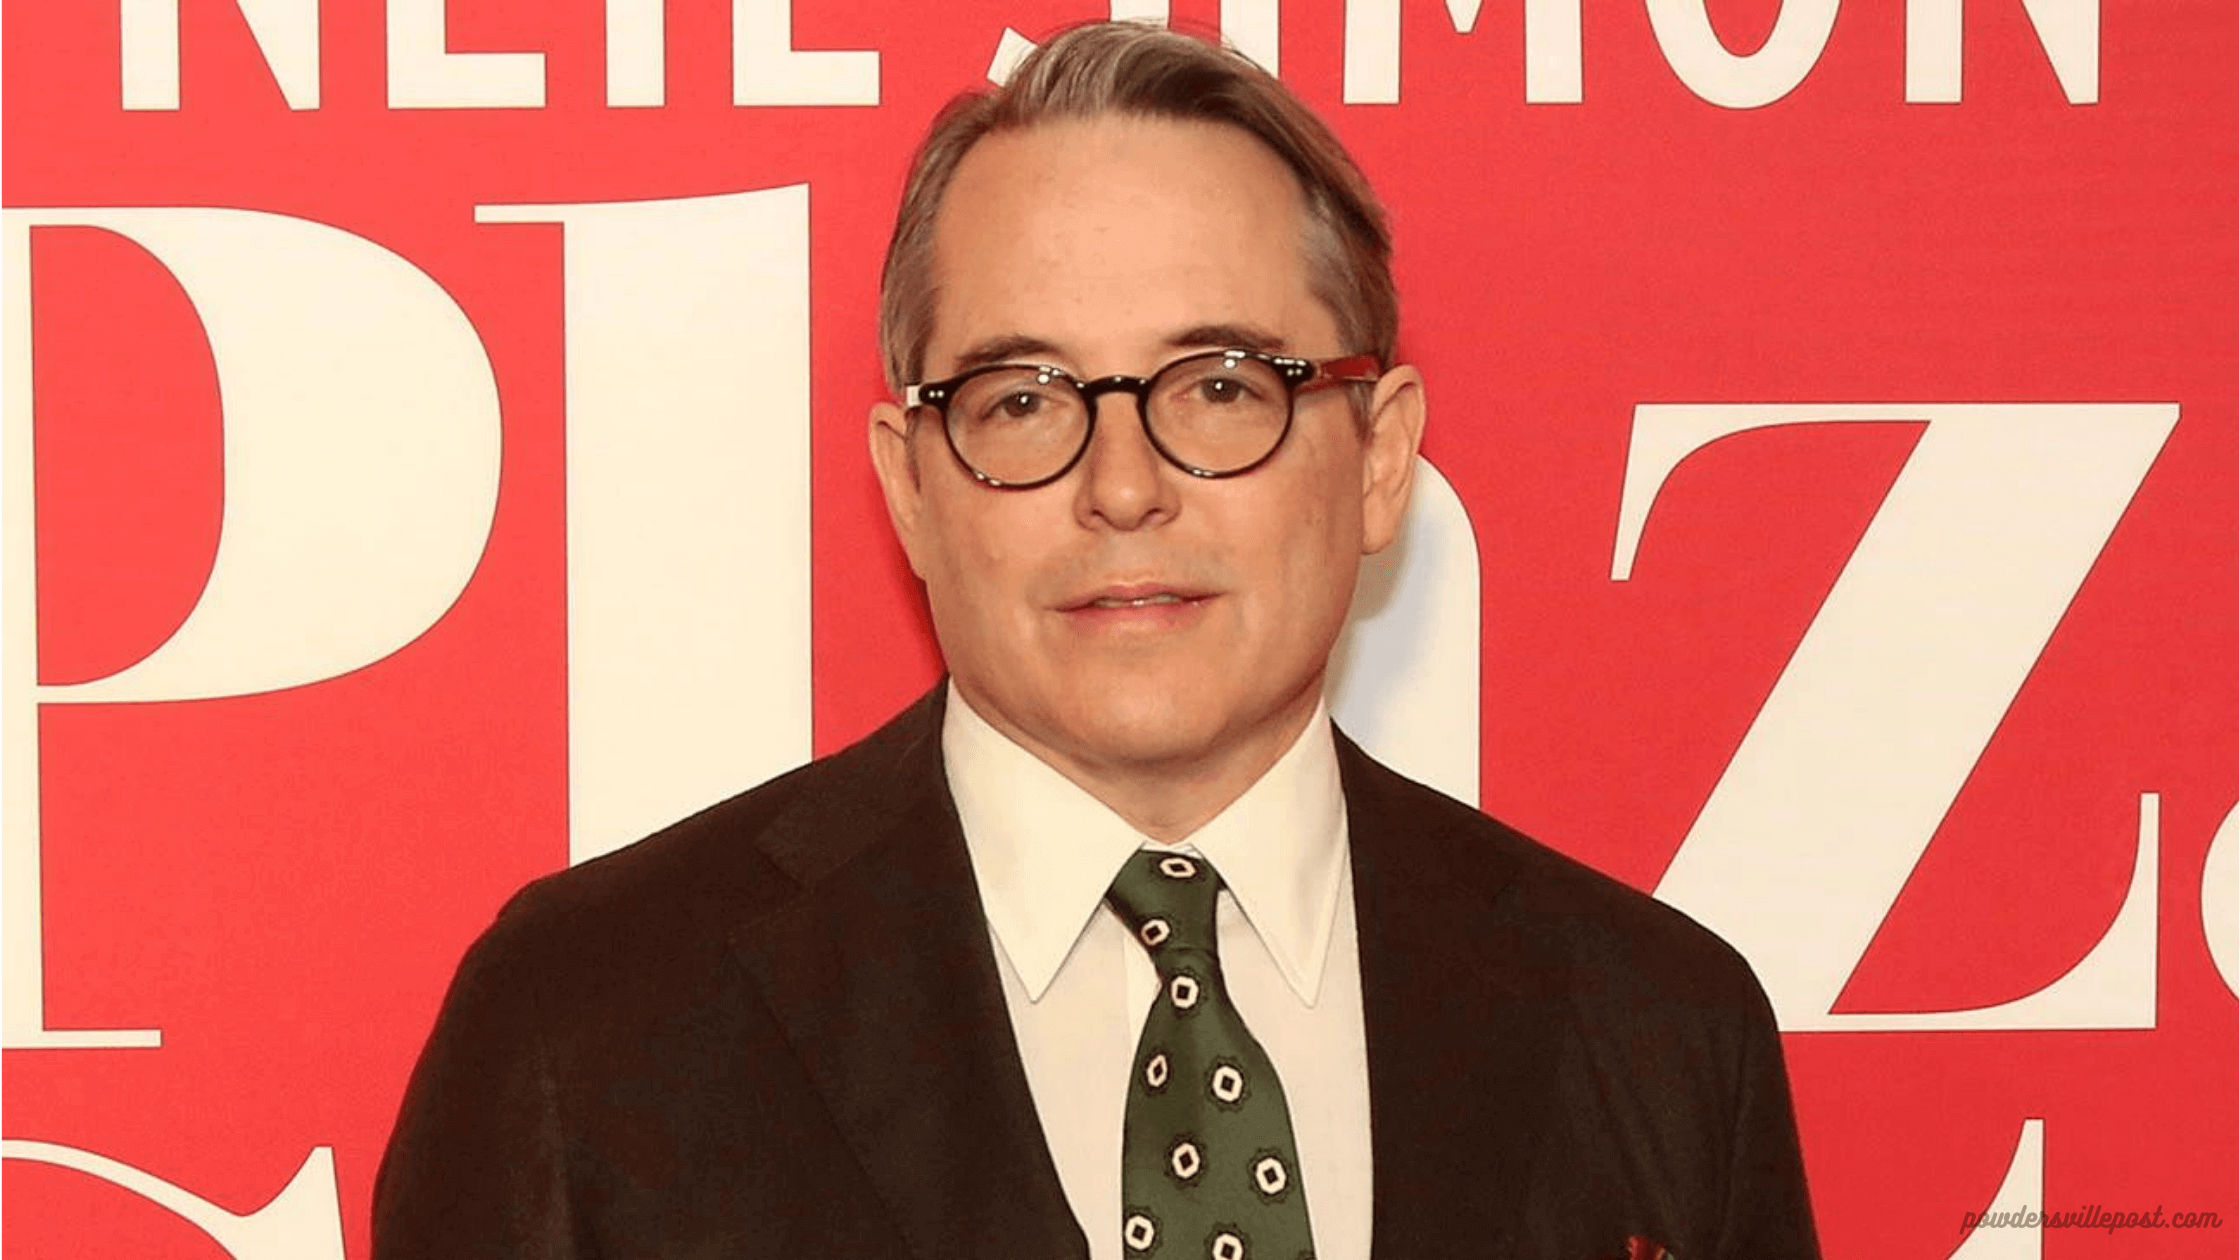 Matthew Broderick's Biography, Age, Height, Career, Net Worth, Family